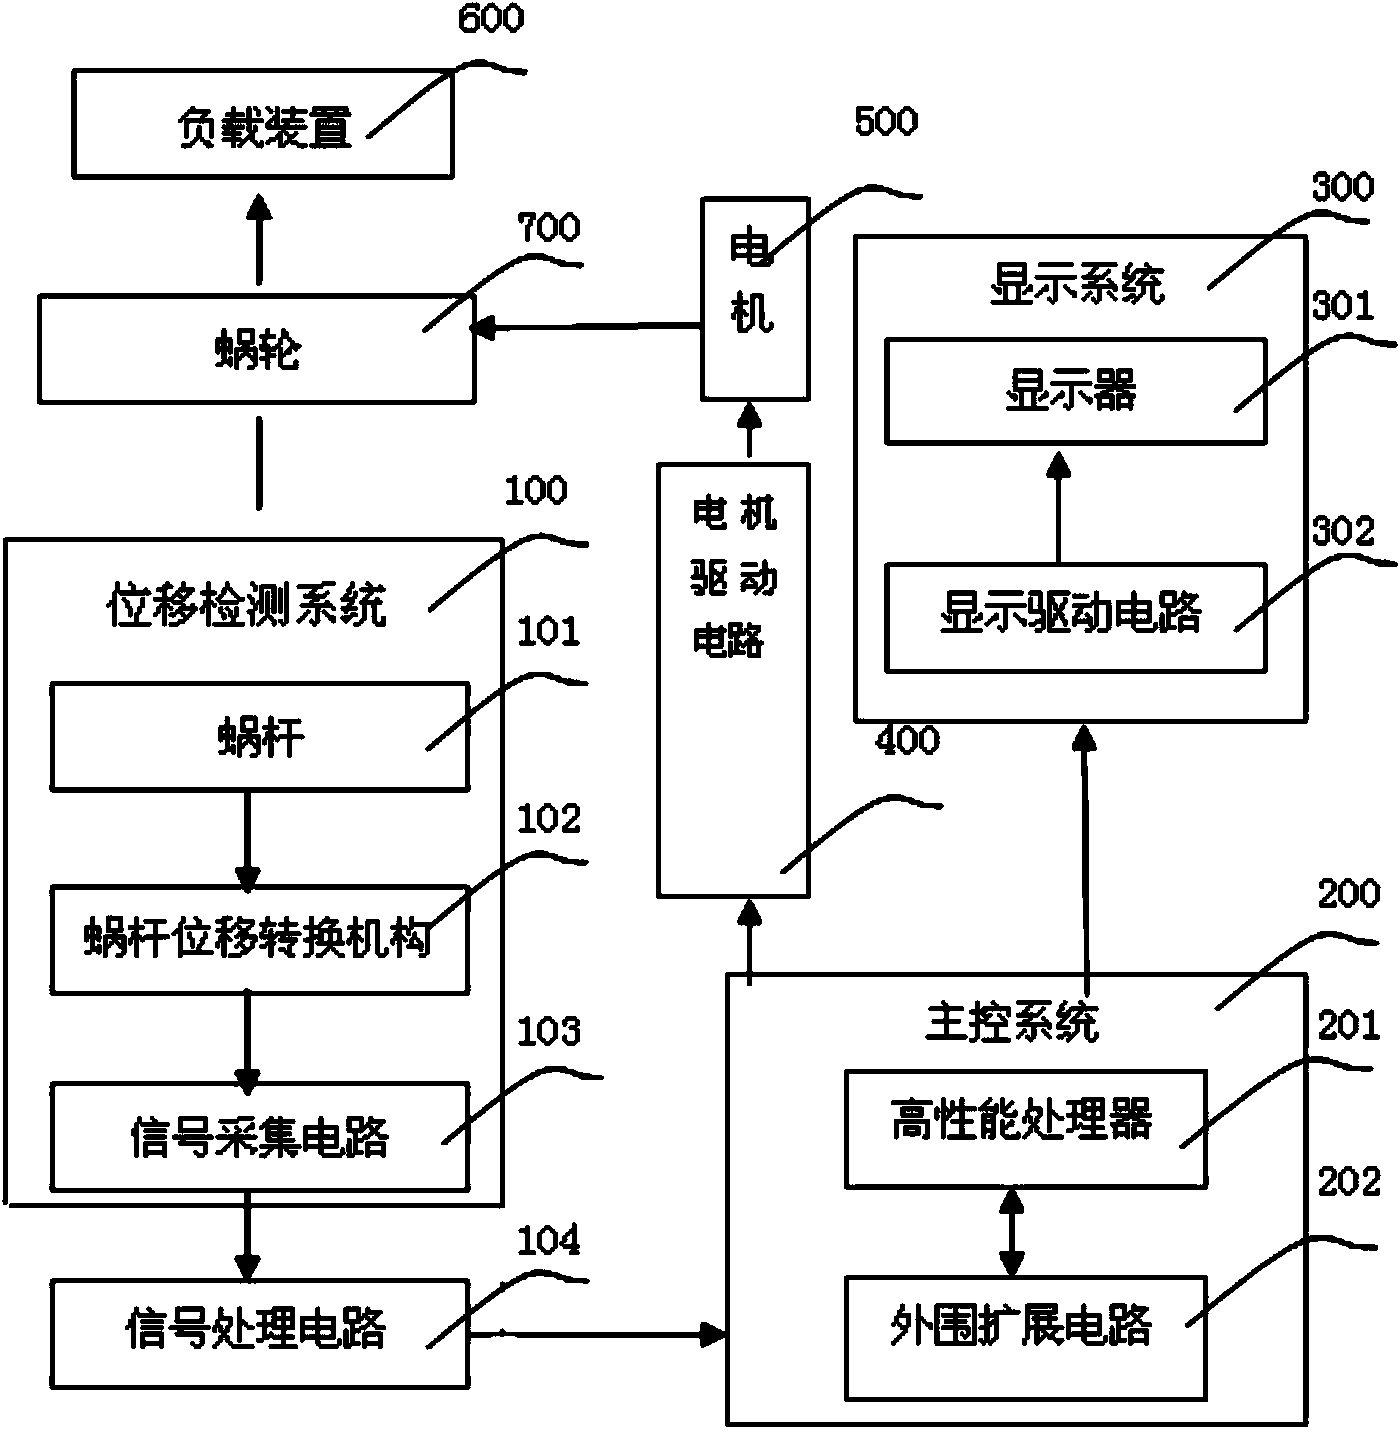 Torque control system and method of electric actuator